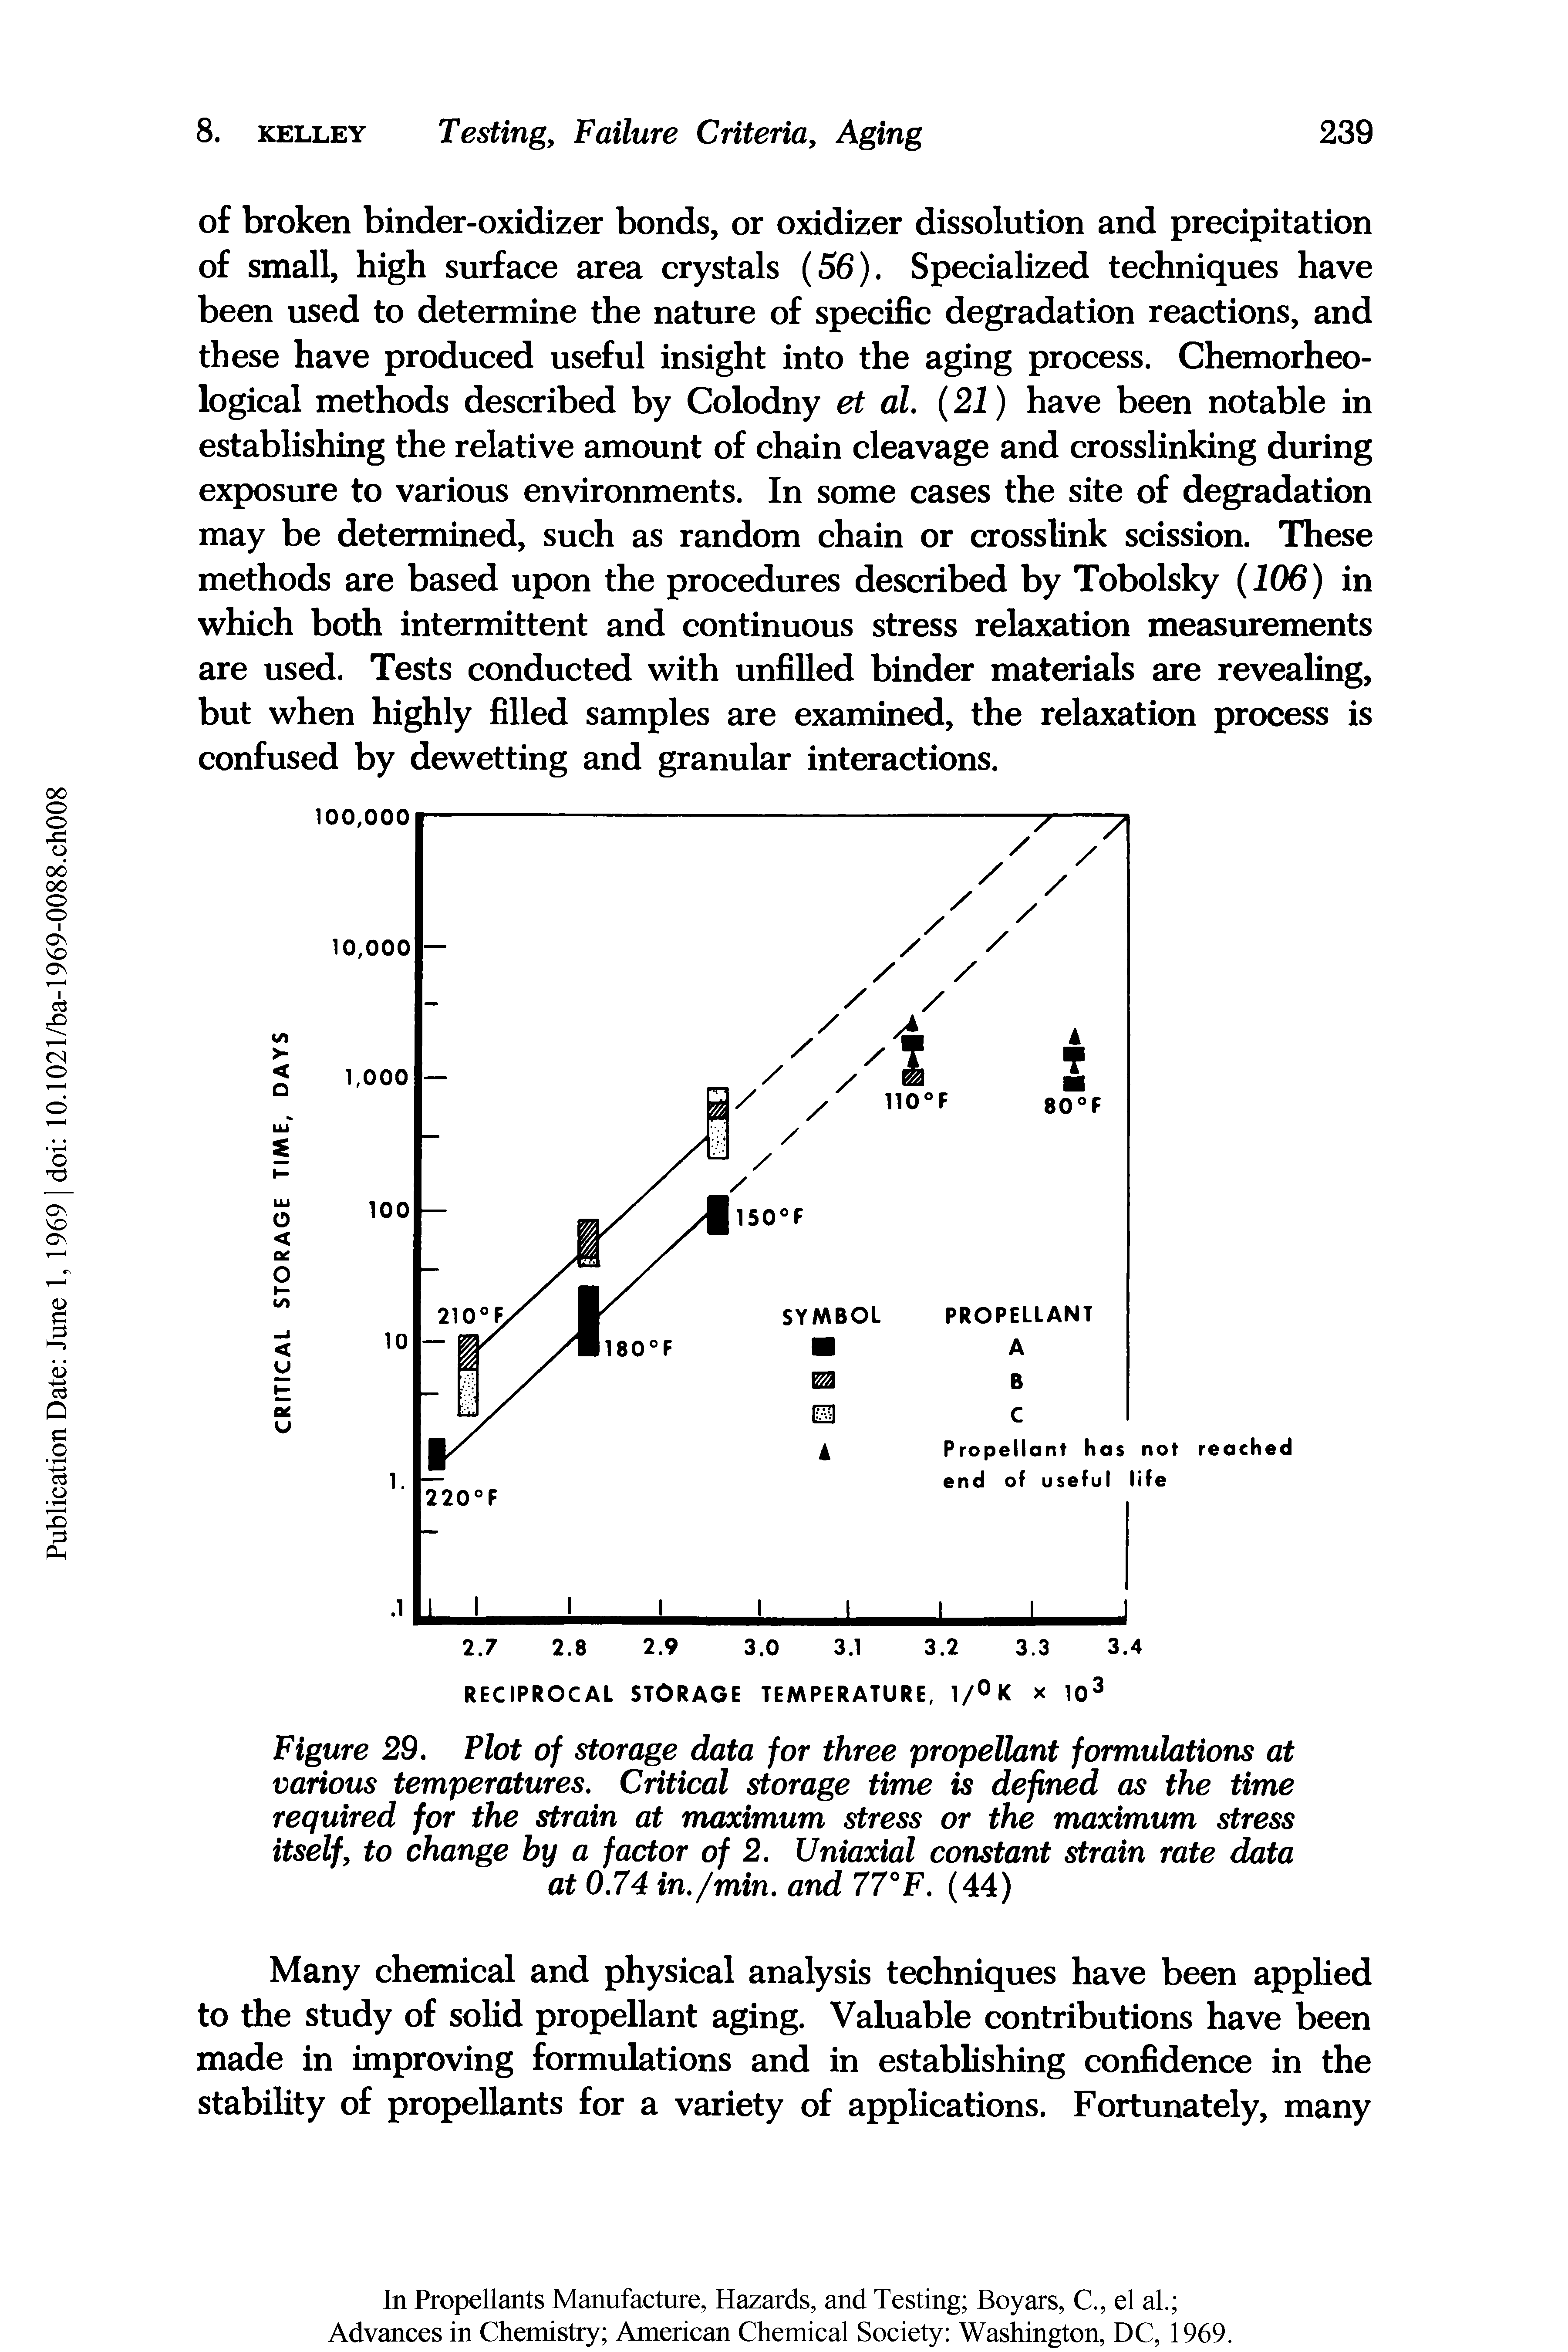 Figure 29. Plot of storage data for three propellant formulations at various temperatures. Critical storage time is defined as the time required for the strain at maximum stress or the maximum stress itself, to change by a factor of 2. Uniaxial constant strain rate data at 0.74 in./min. and 77°F. (44)...